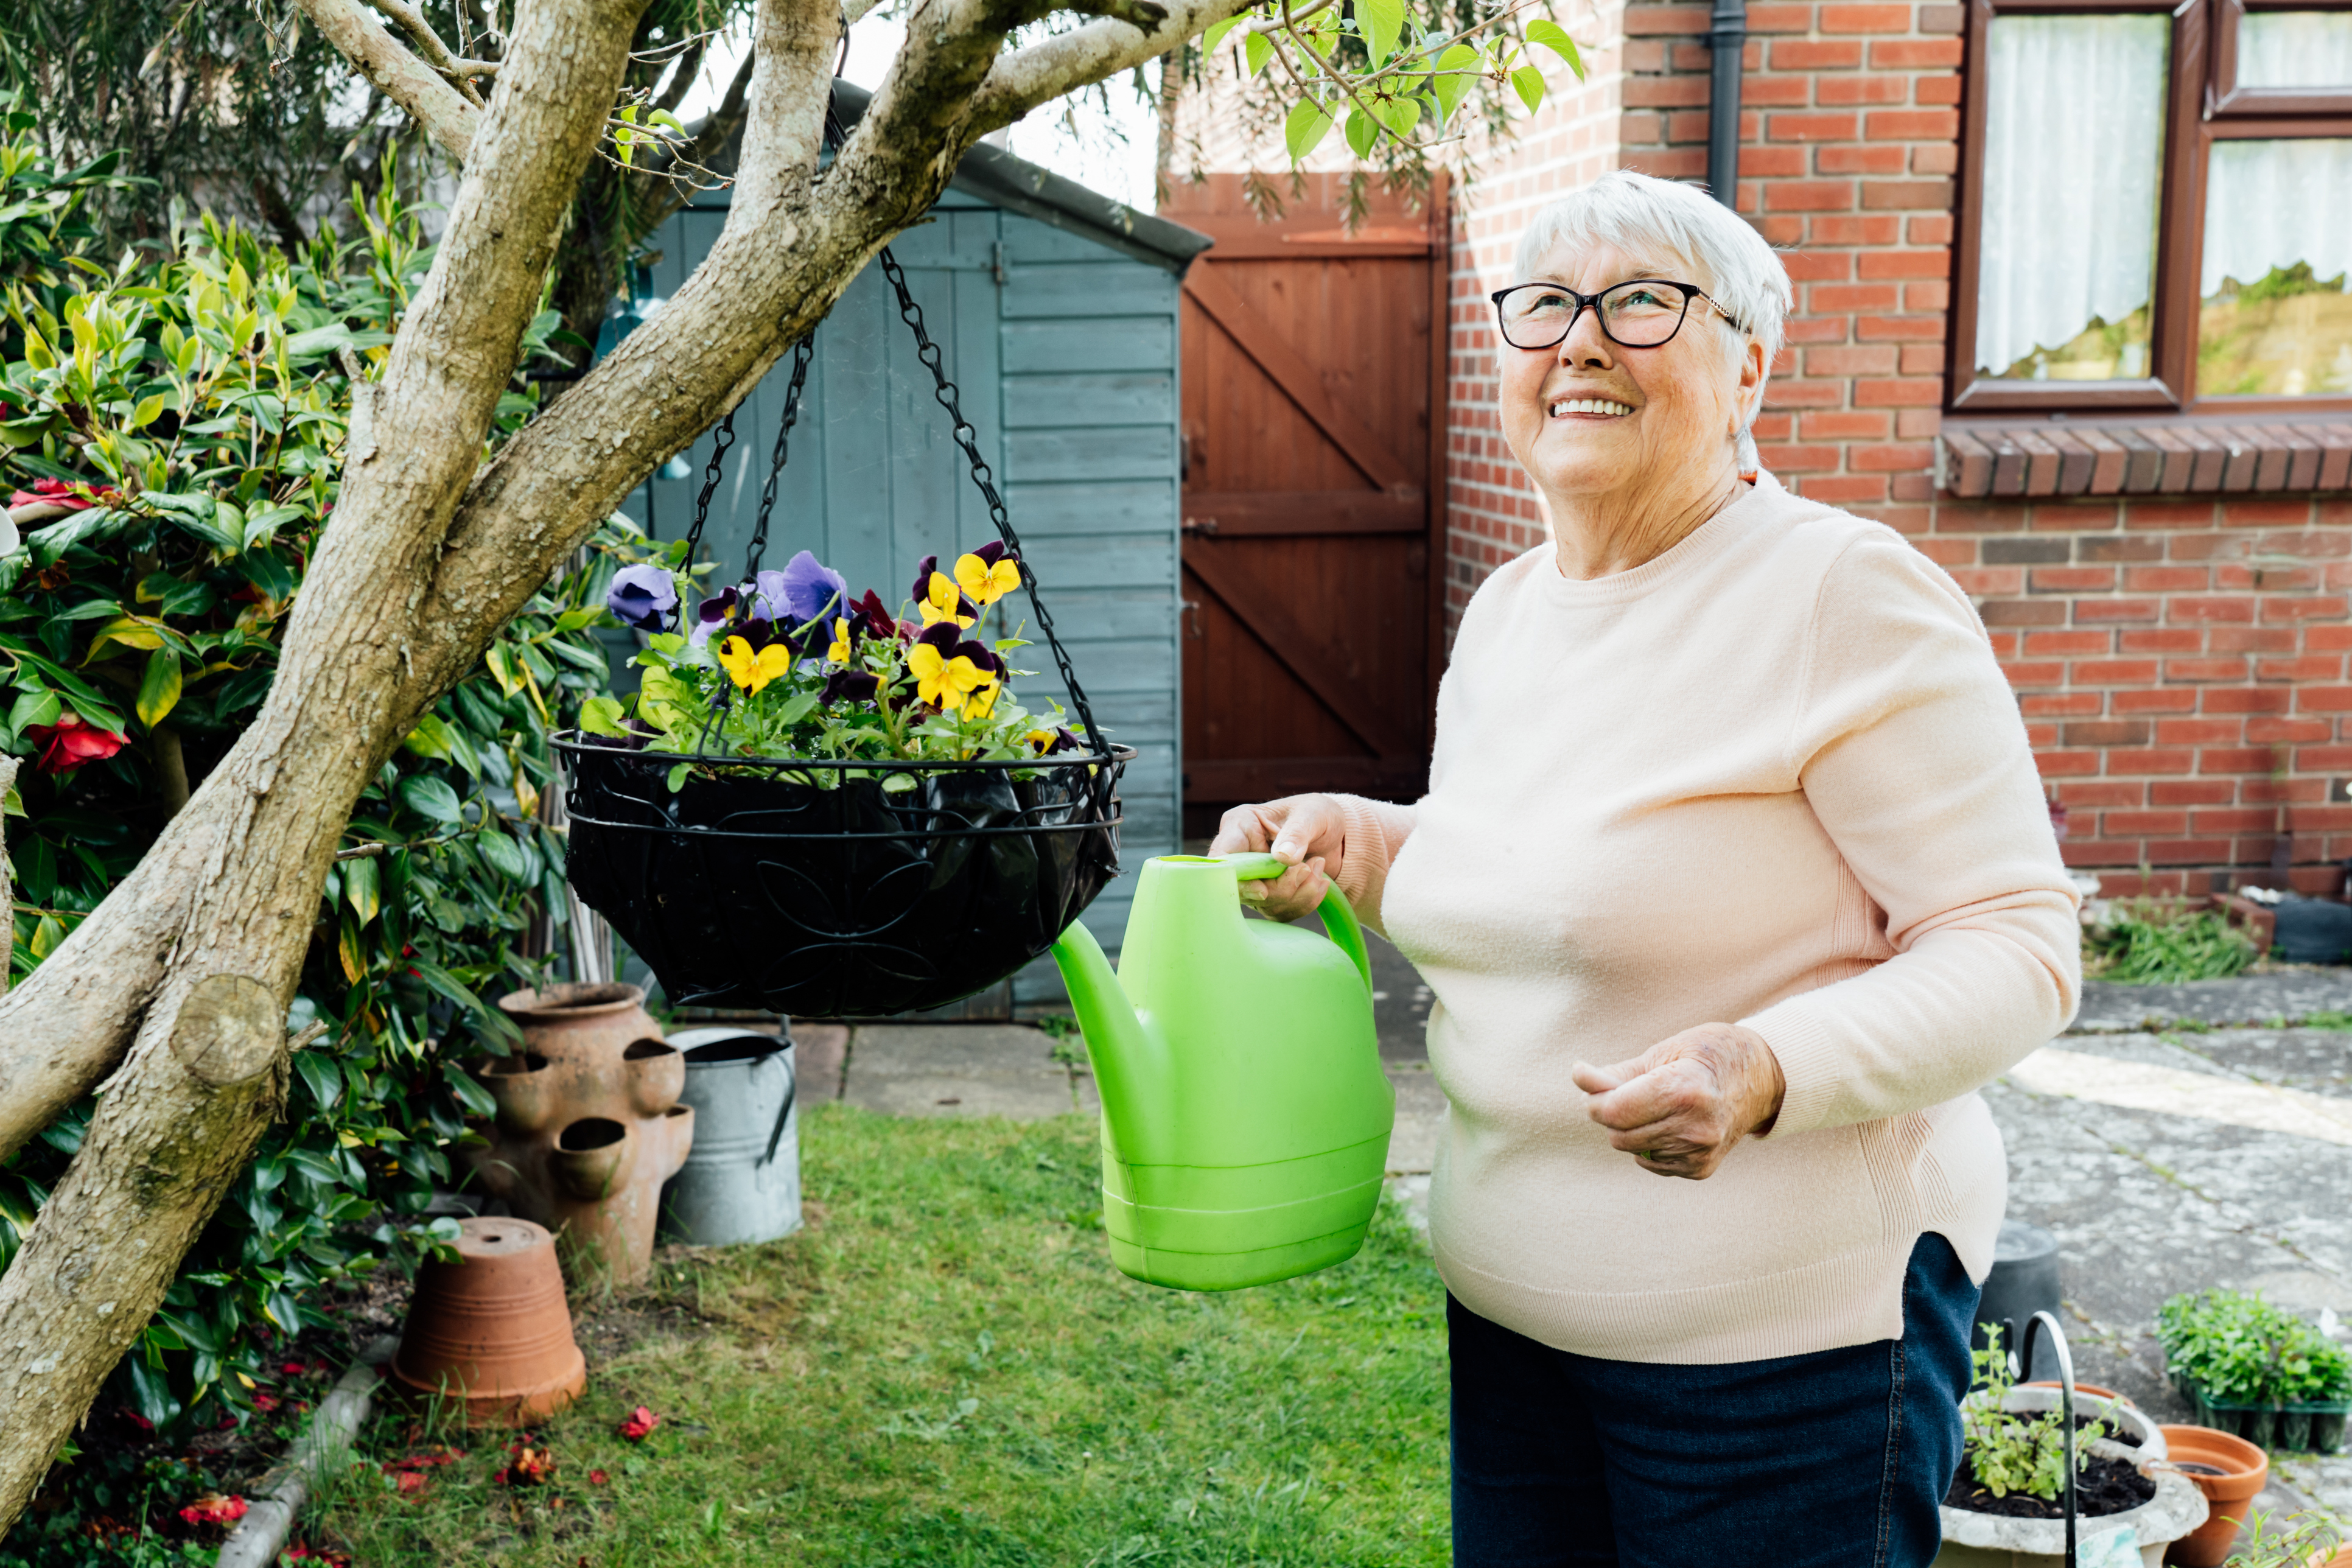 Older woman in her garden watering hanging basket with green watering can, smiling, looking upward